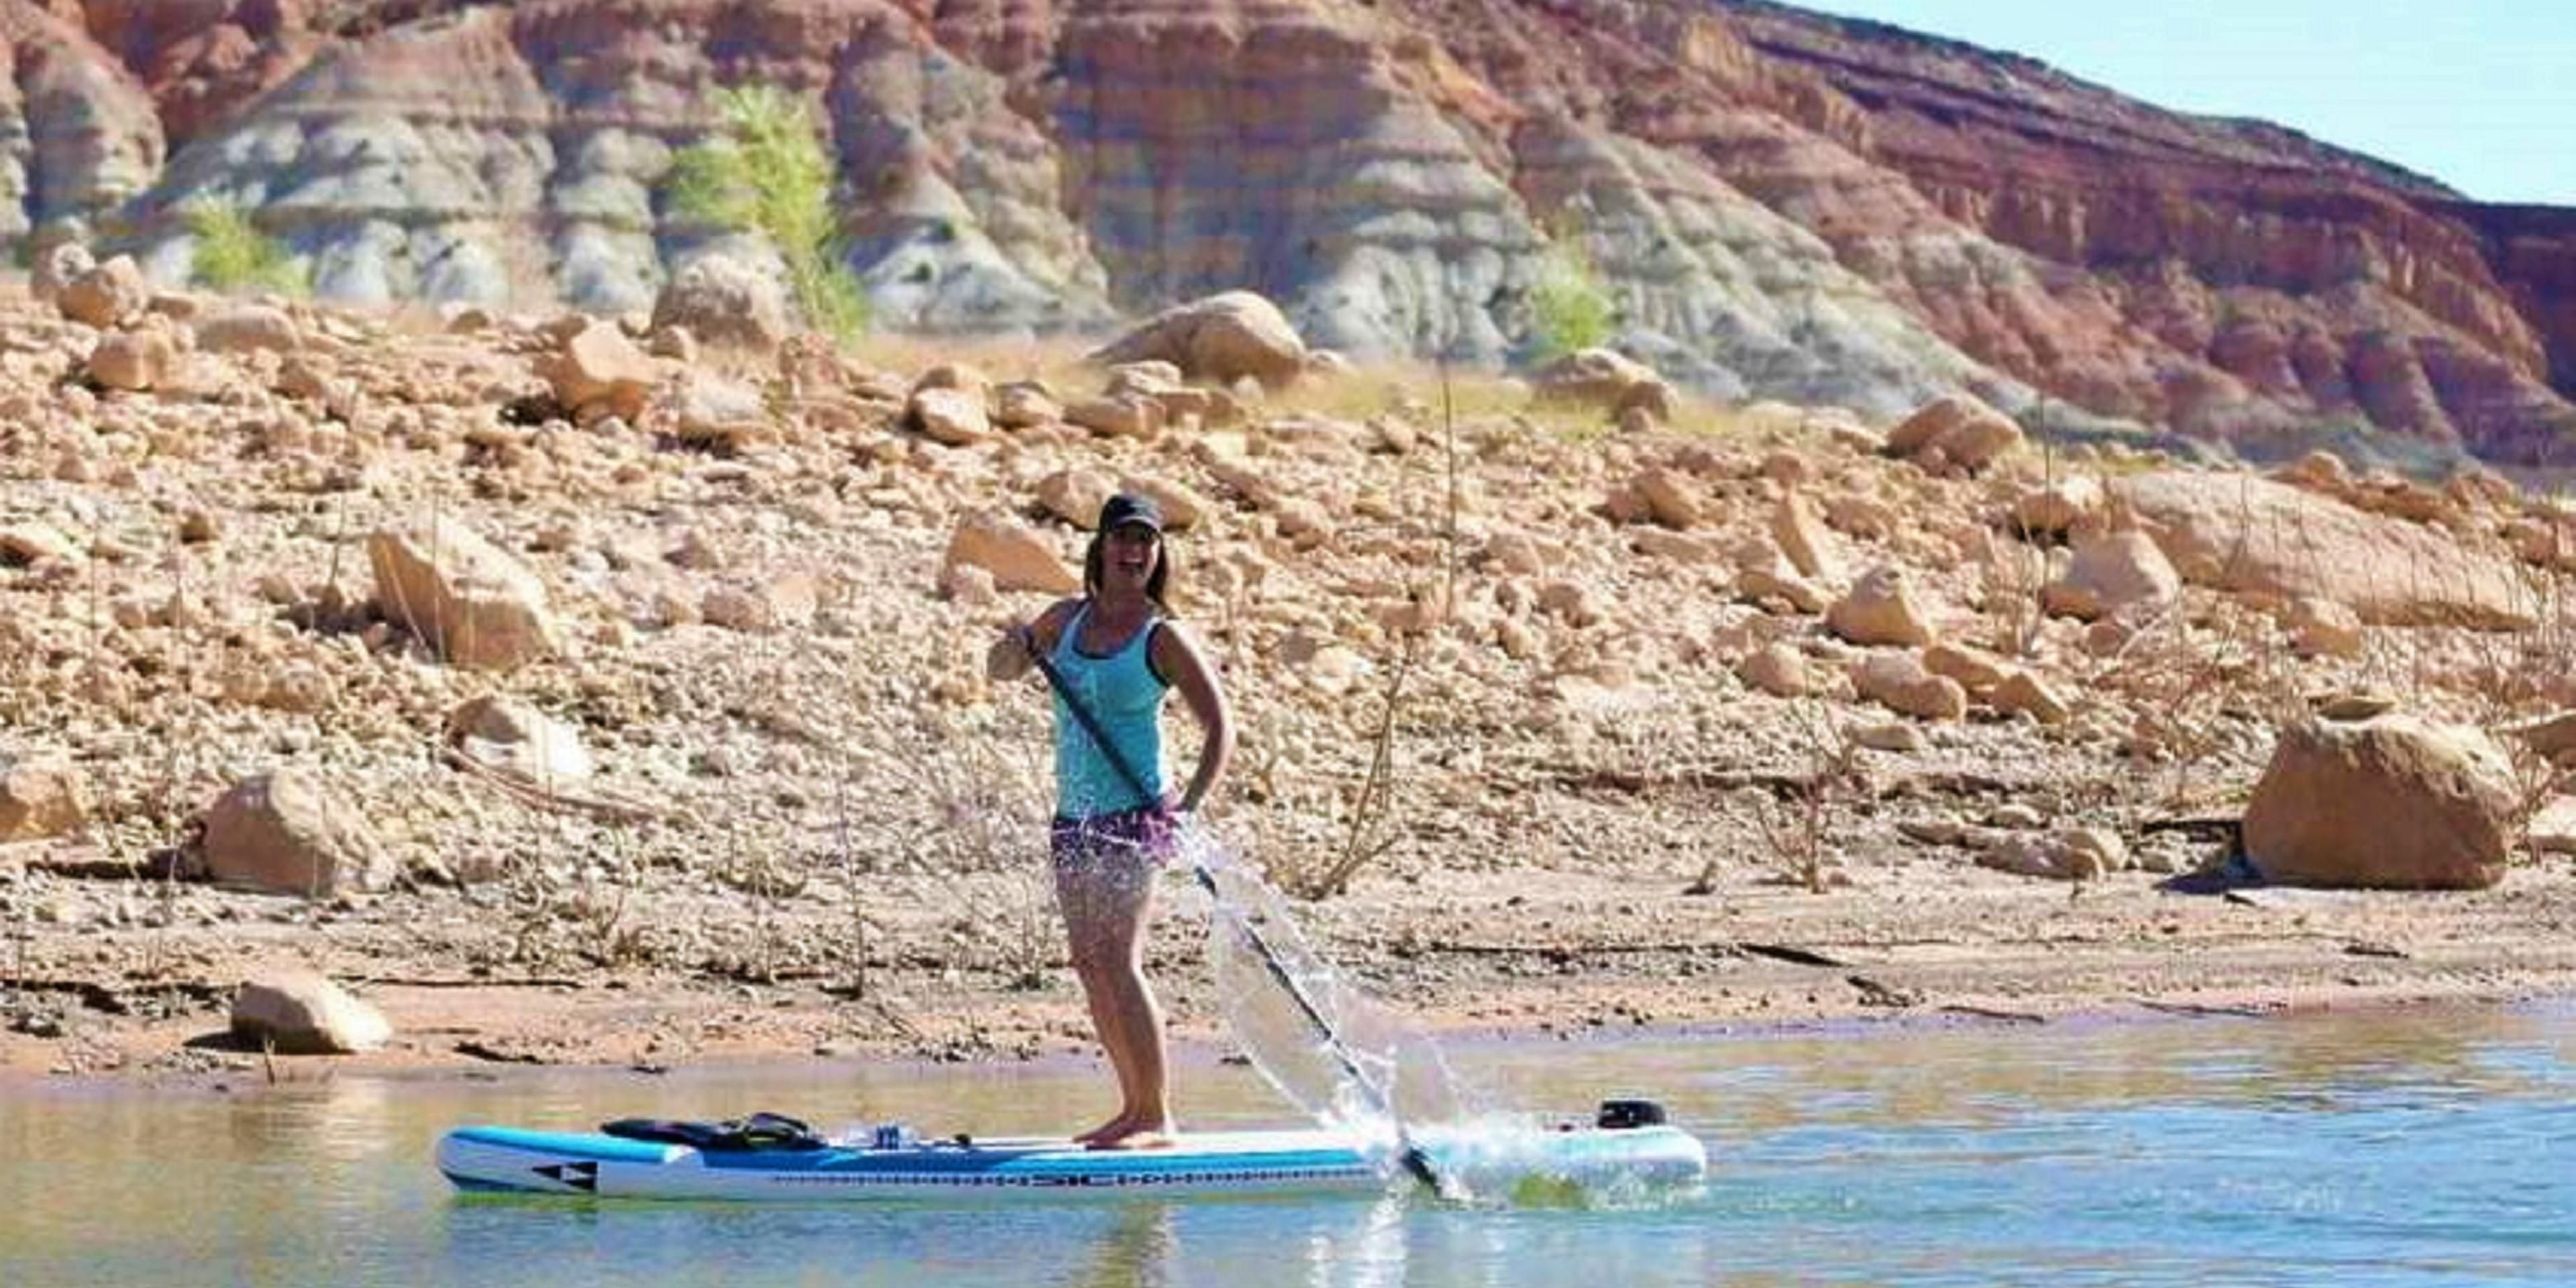 Boasting some of the warmest waters in Southern Utah, Quail Creek State Park is 7 min. from Holiday Inn Express St. George North. Enjoy paddle boarding, kayaking, fishing and more. Come enjoy the great outdoors!